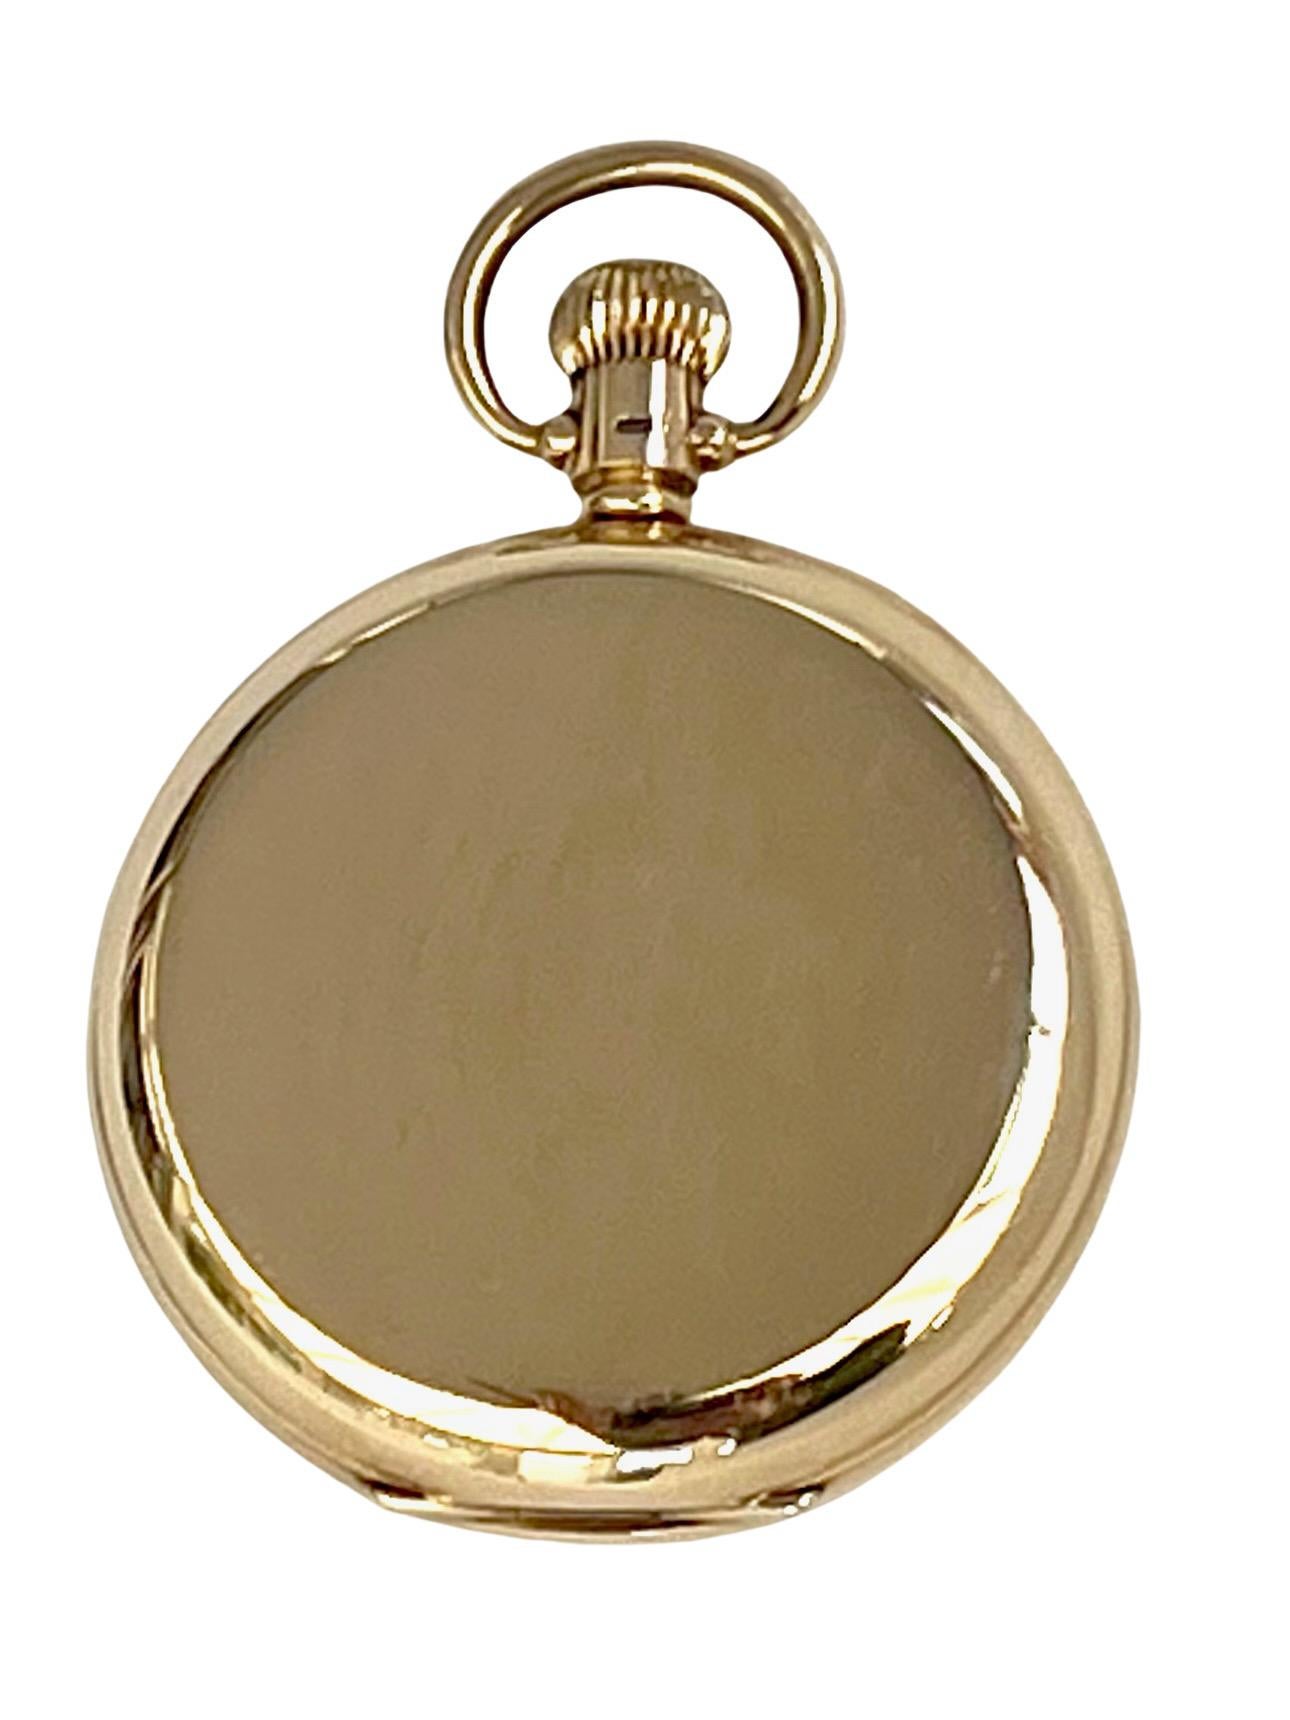 9 Carat Solid Gold Open Faced Pocket Watch by Garrard In Good Condition For Sale In London, GB